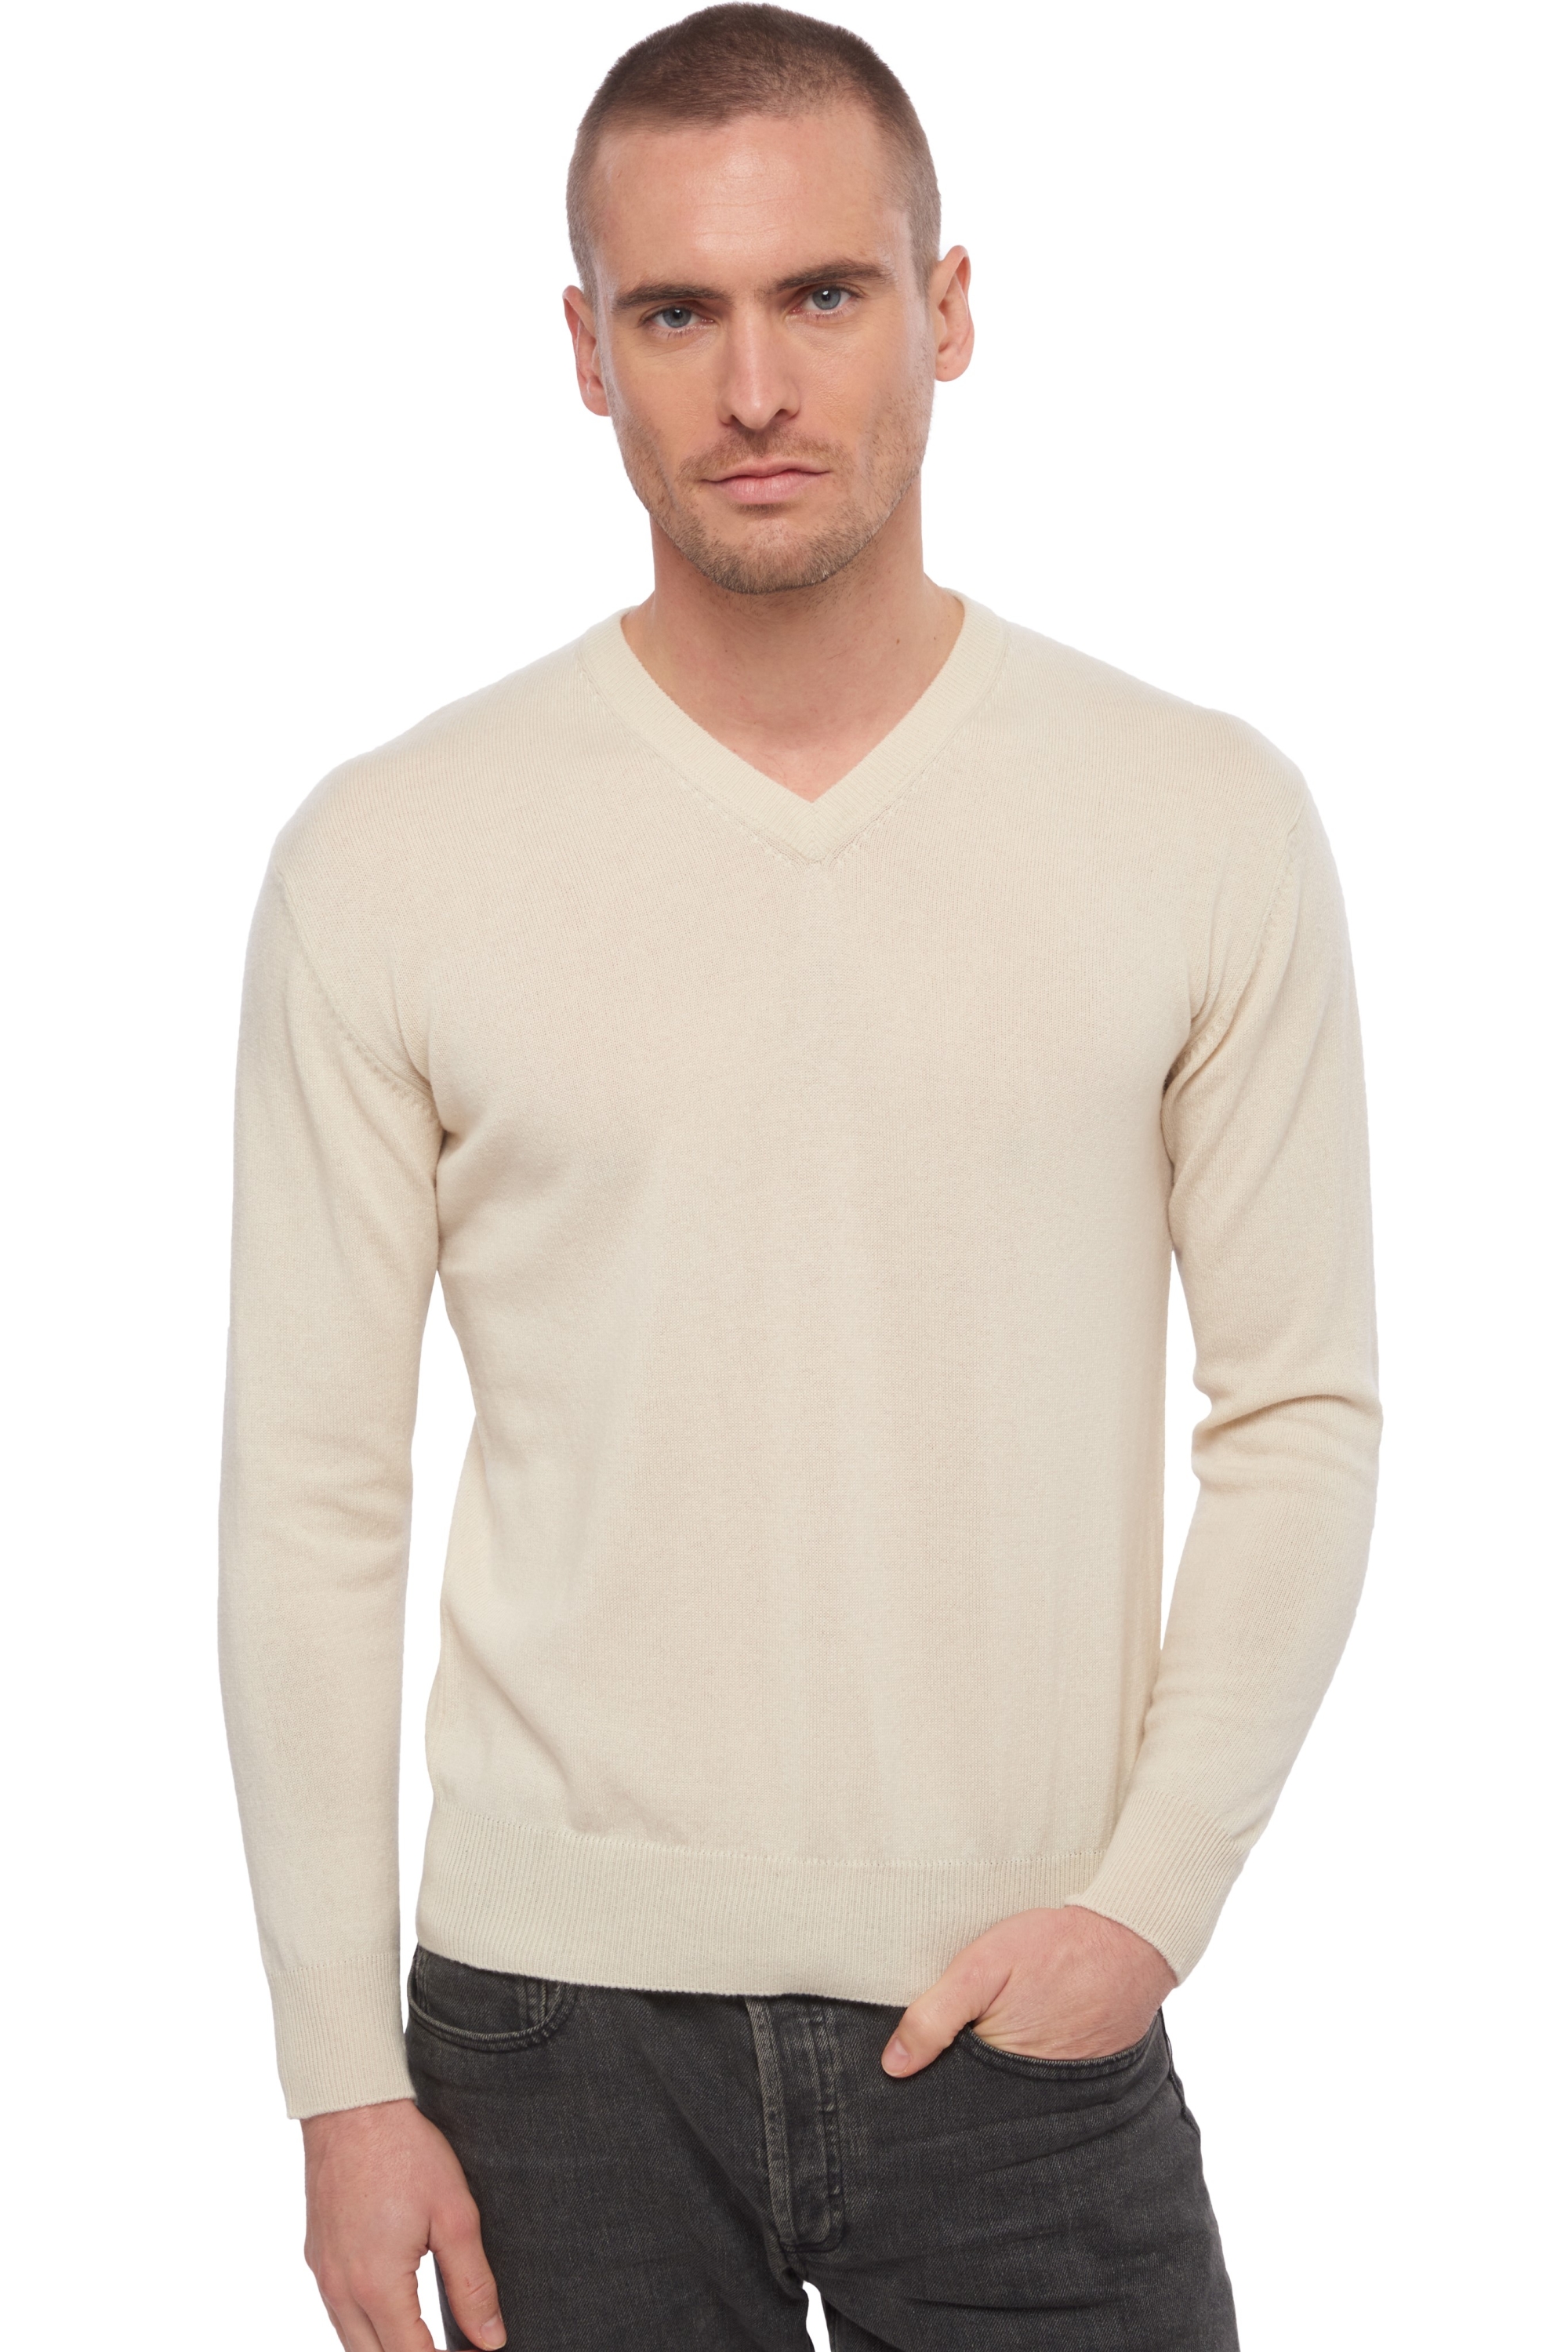 Cachemire pull homme hippolyte natural ecru 2xl